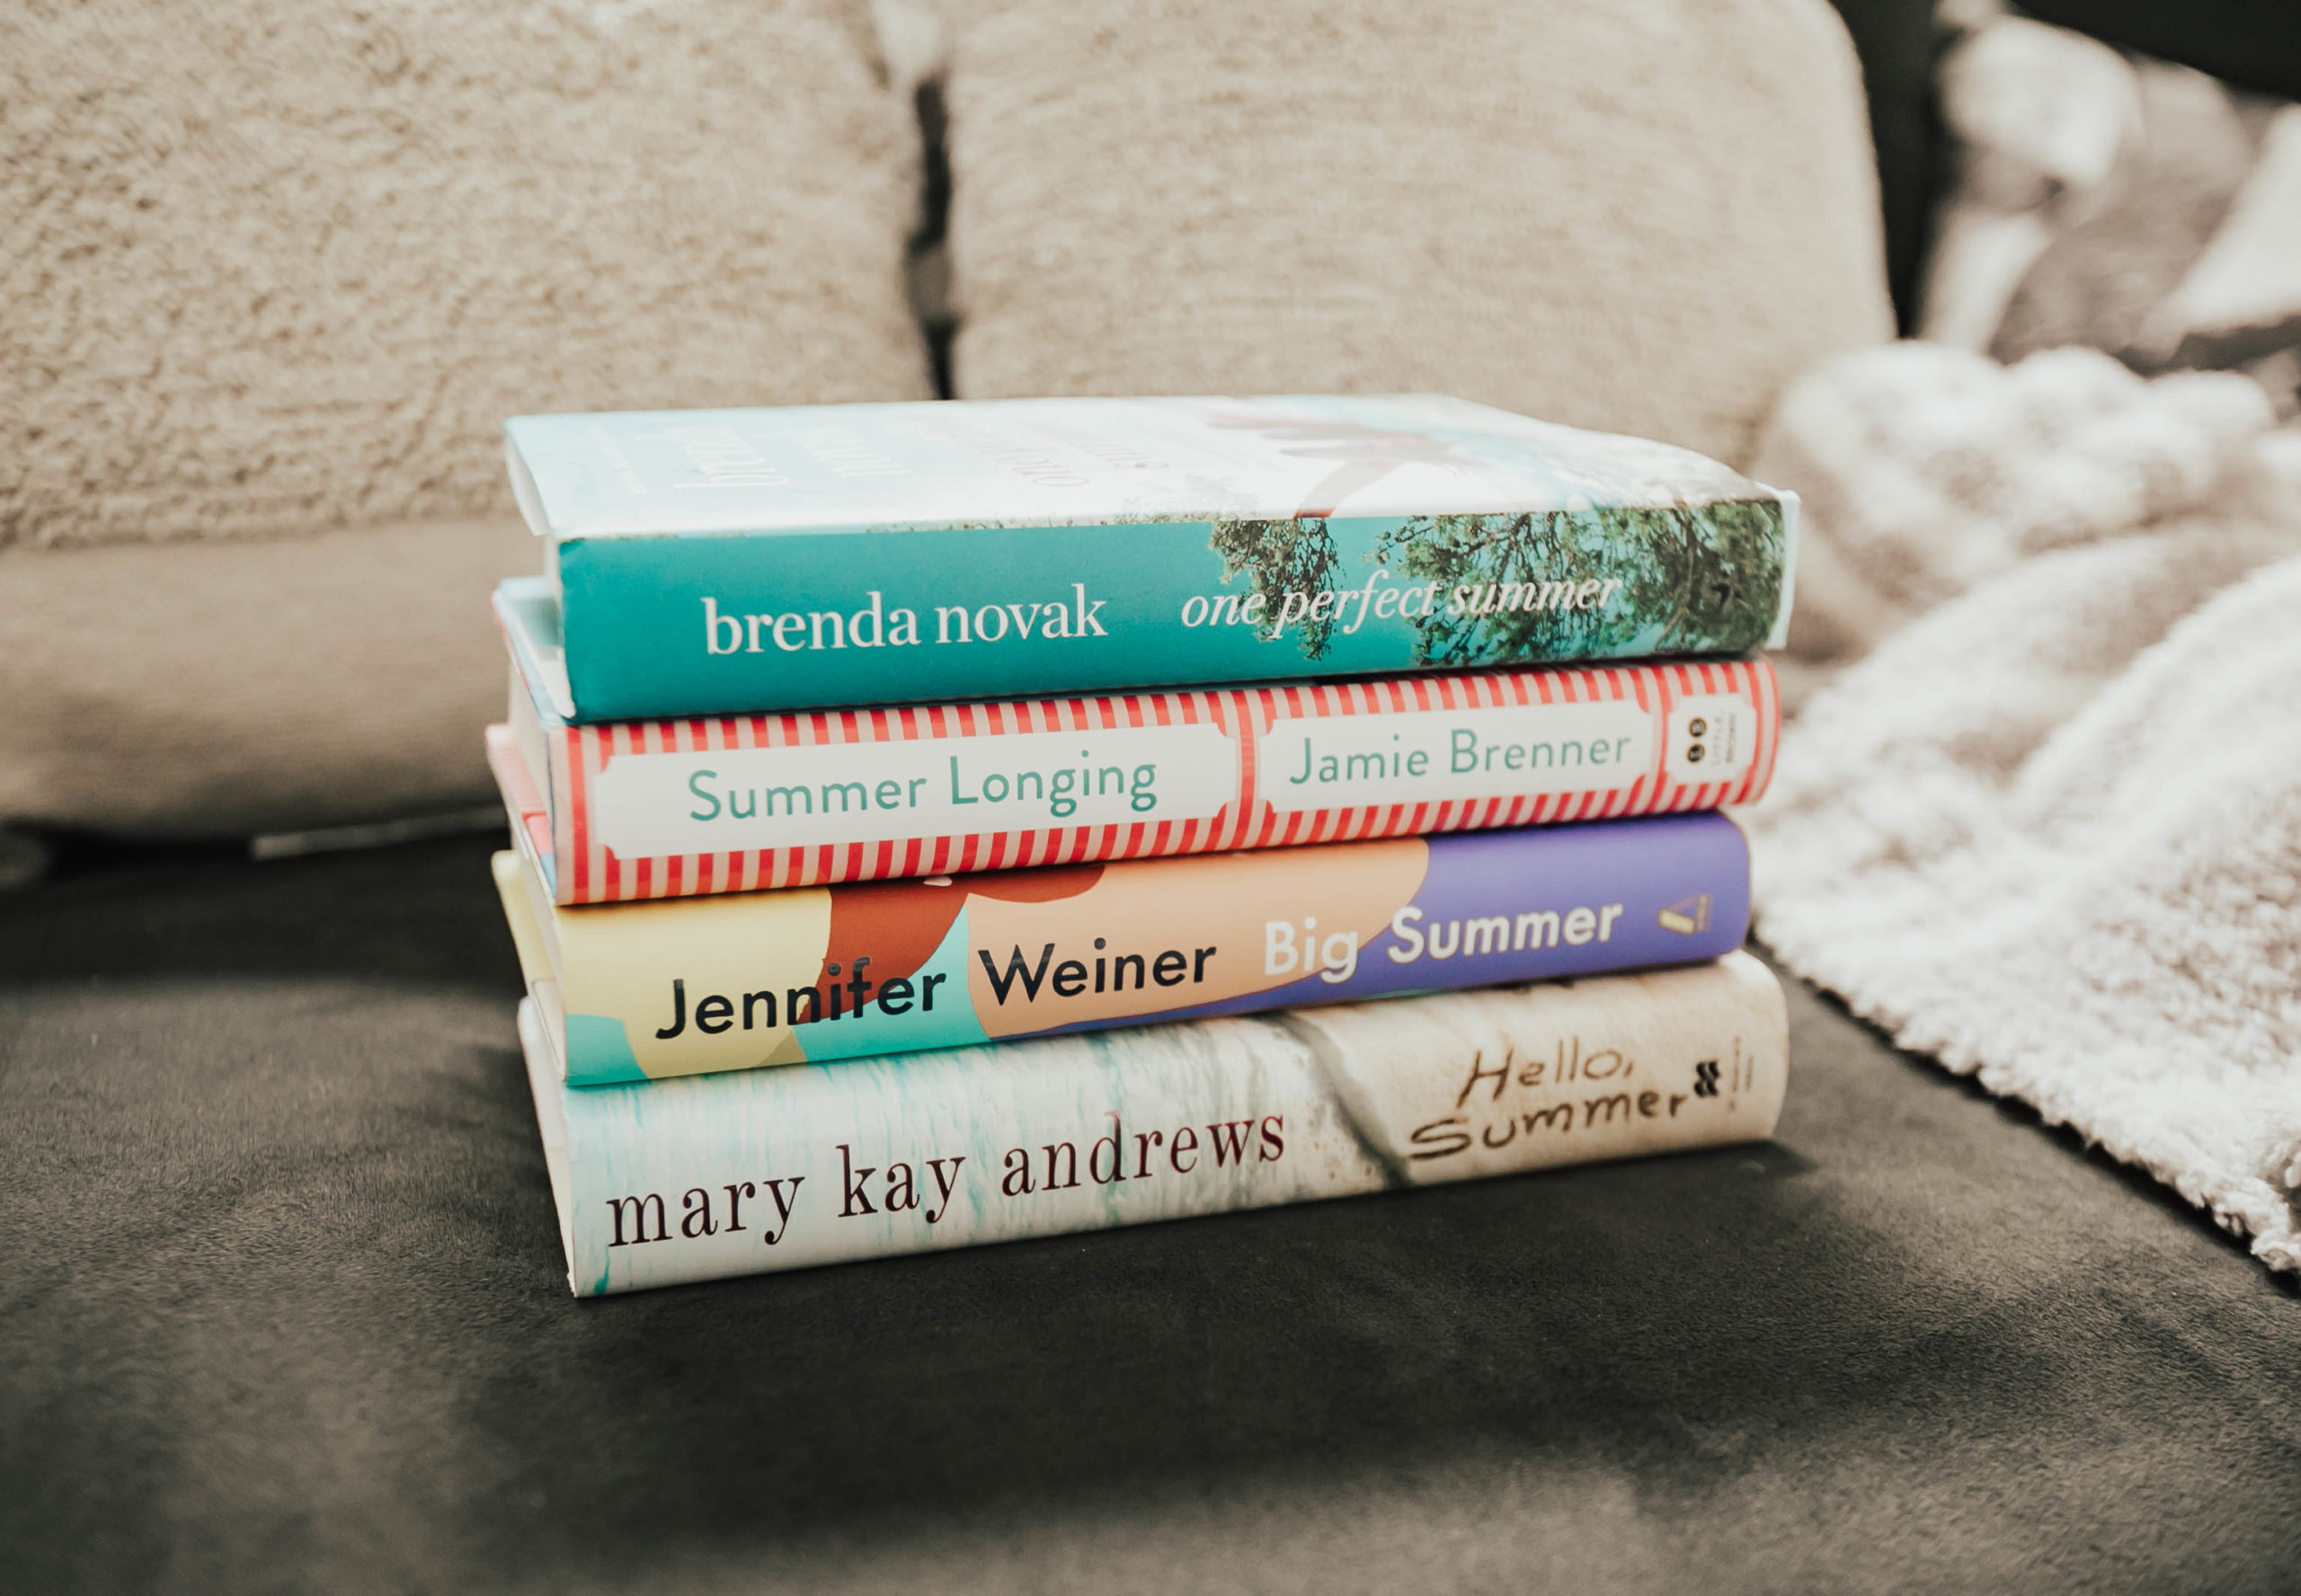 Reno blogger, Ashley Zeal, from Two Peas in a Prada shares her list of the best summer books out this year. No beach bag is complete without one of these books!